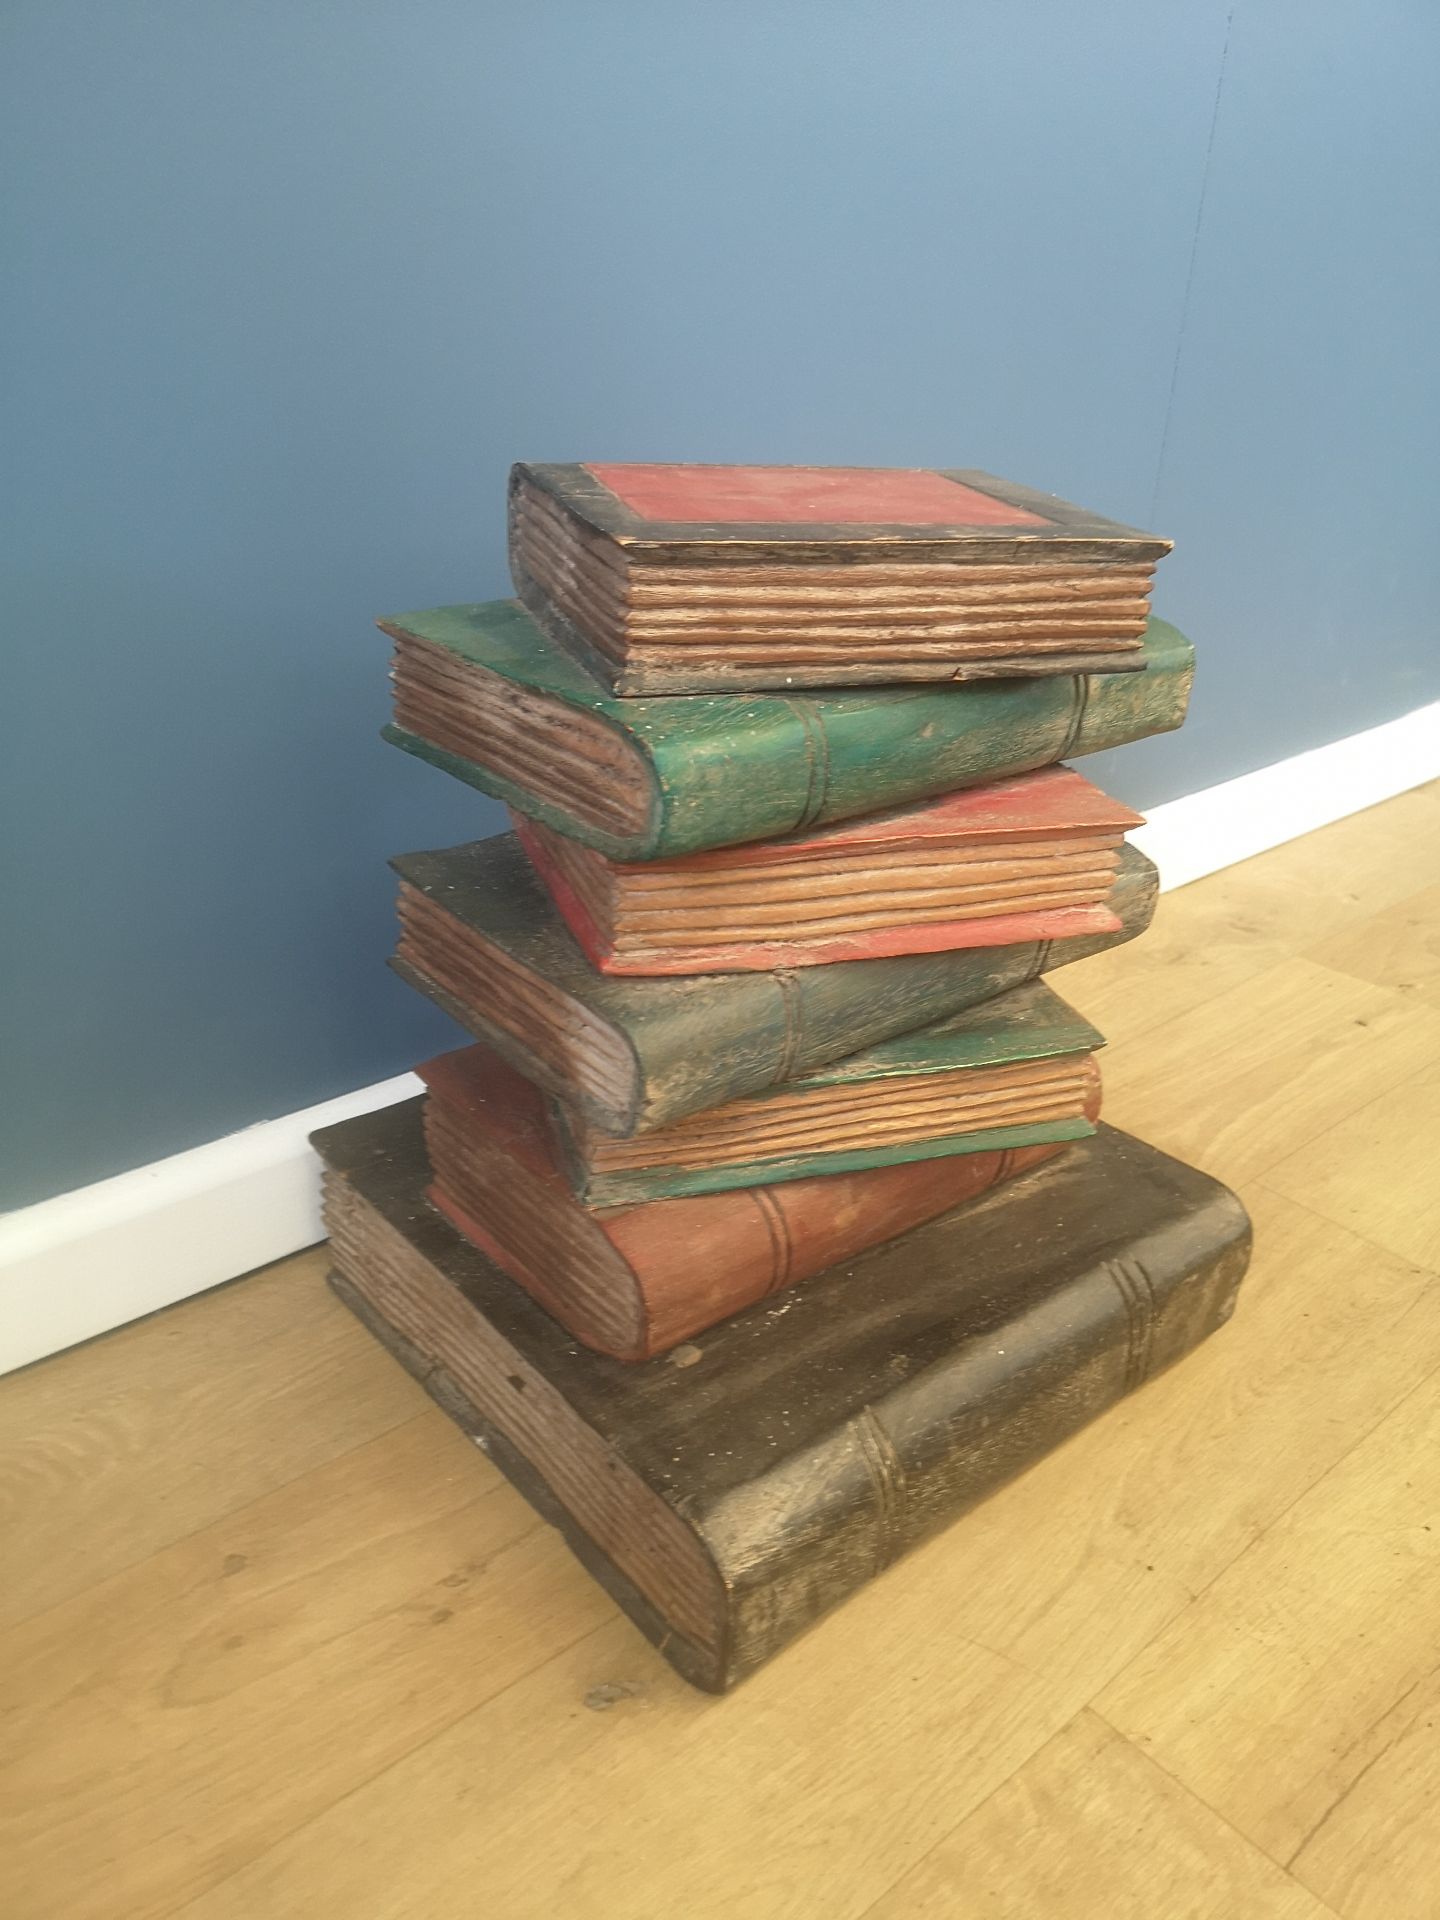 Decorative wood 'pile of books' side table - Image 3 of 4